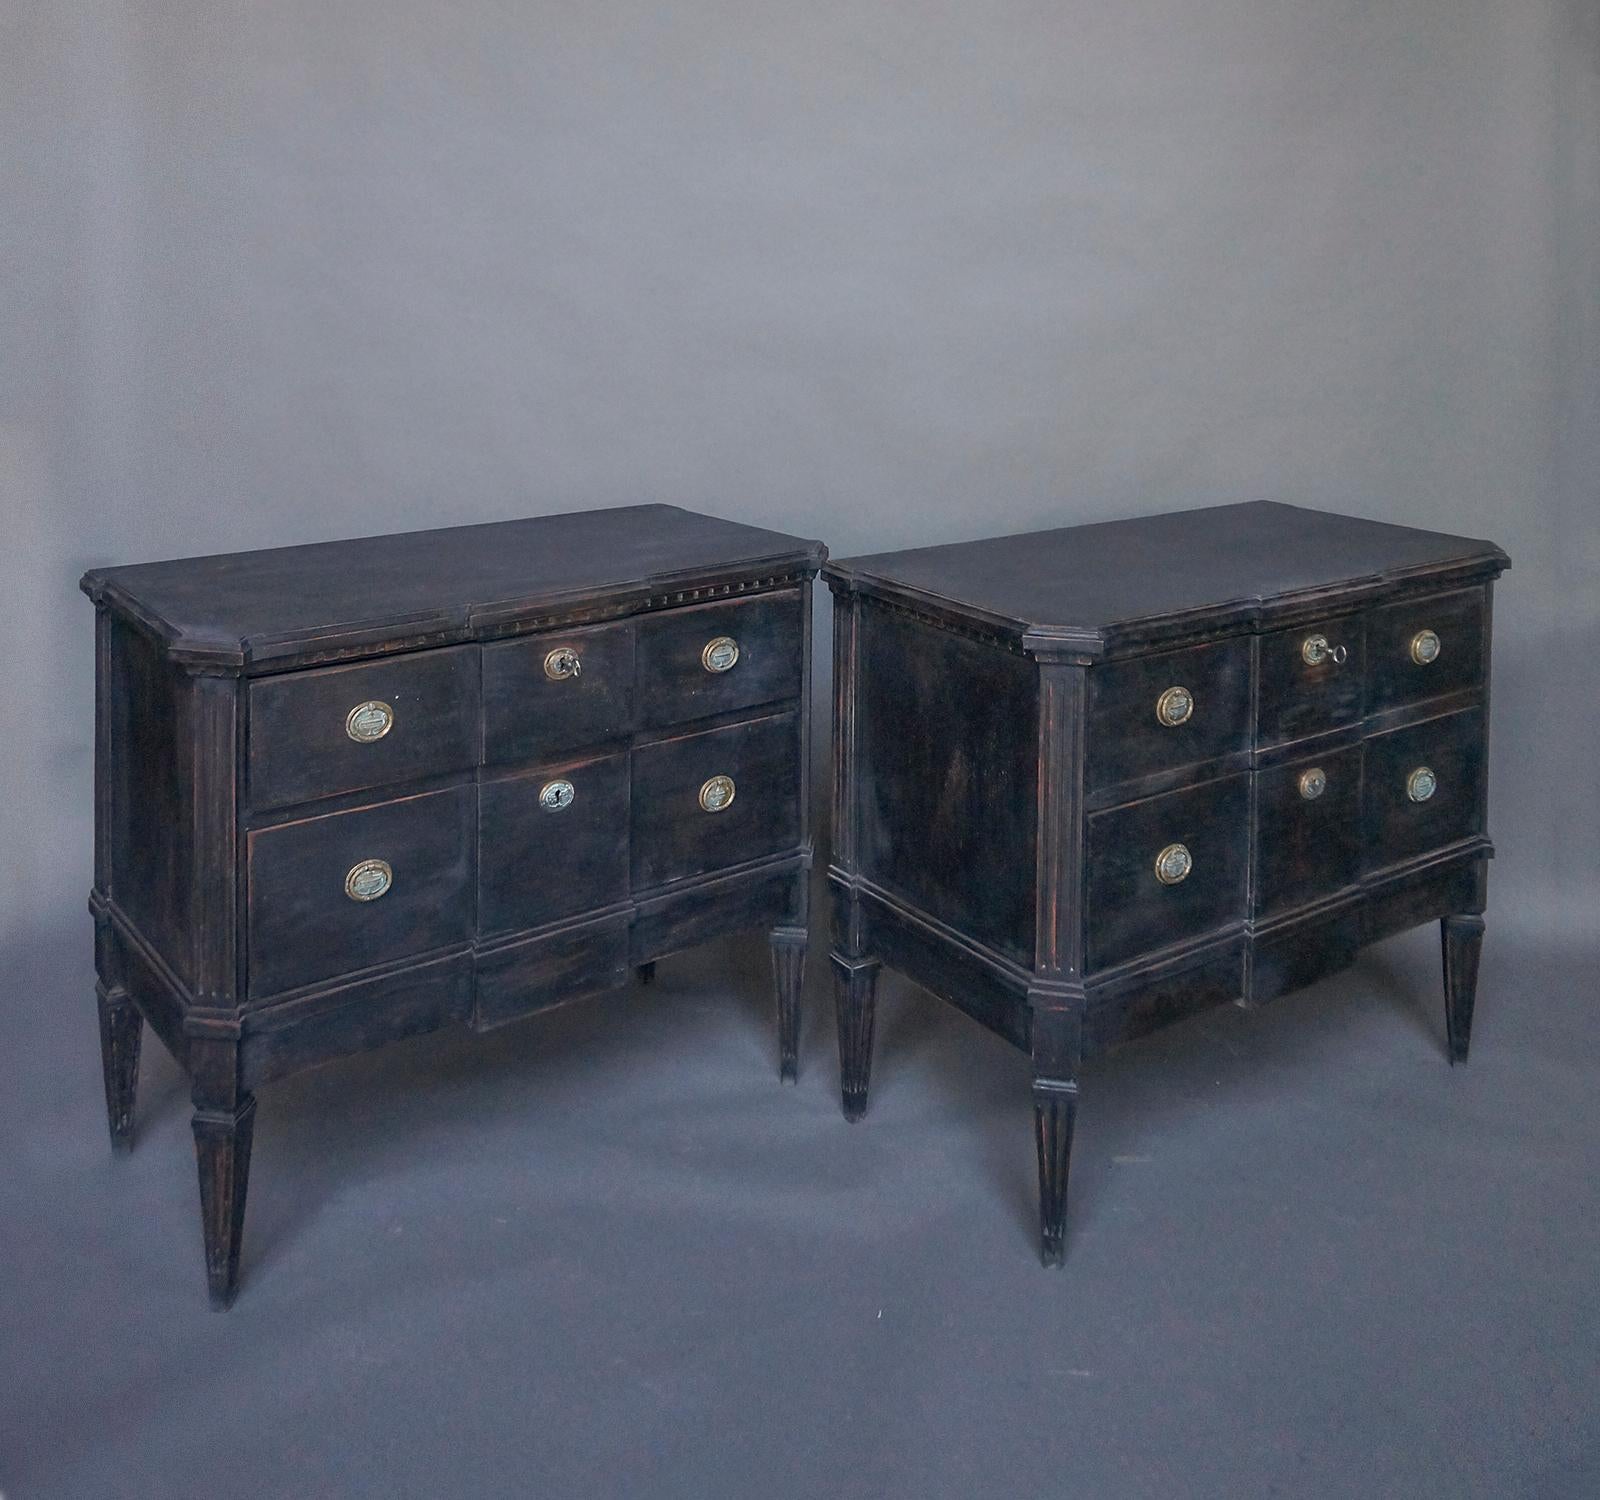 Pair of neoclassical block-front two-drawer commodes, Sweden circa 1850, raised on later bases.  Shaped tops with Dentil molding under the tops.  Canted corners and tapering square legs. Brass pulls and escutcheons.